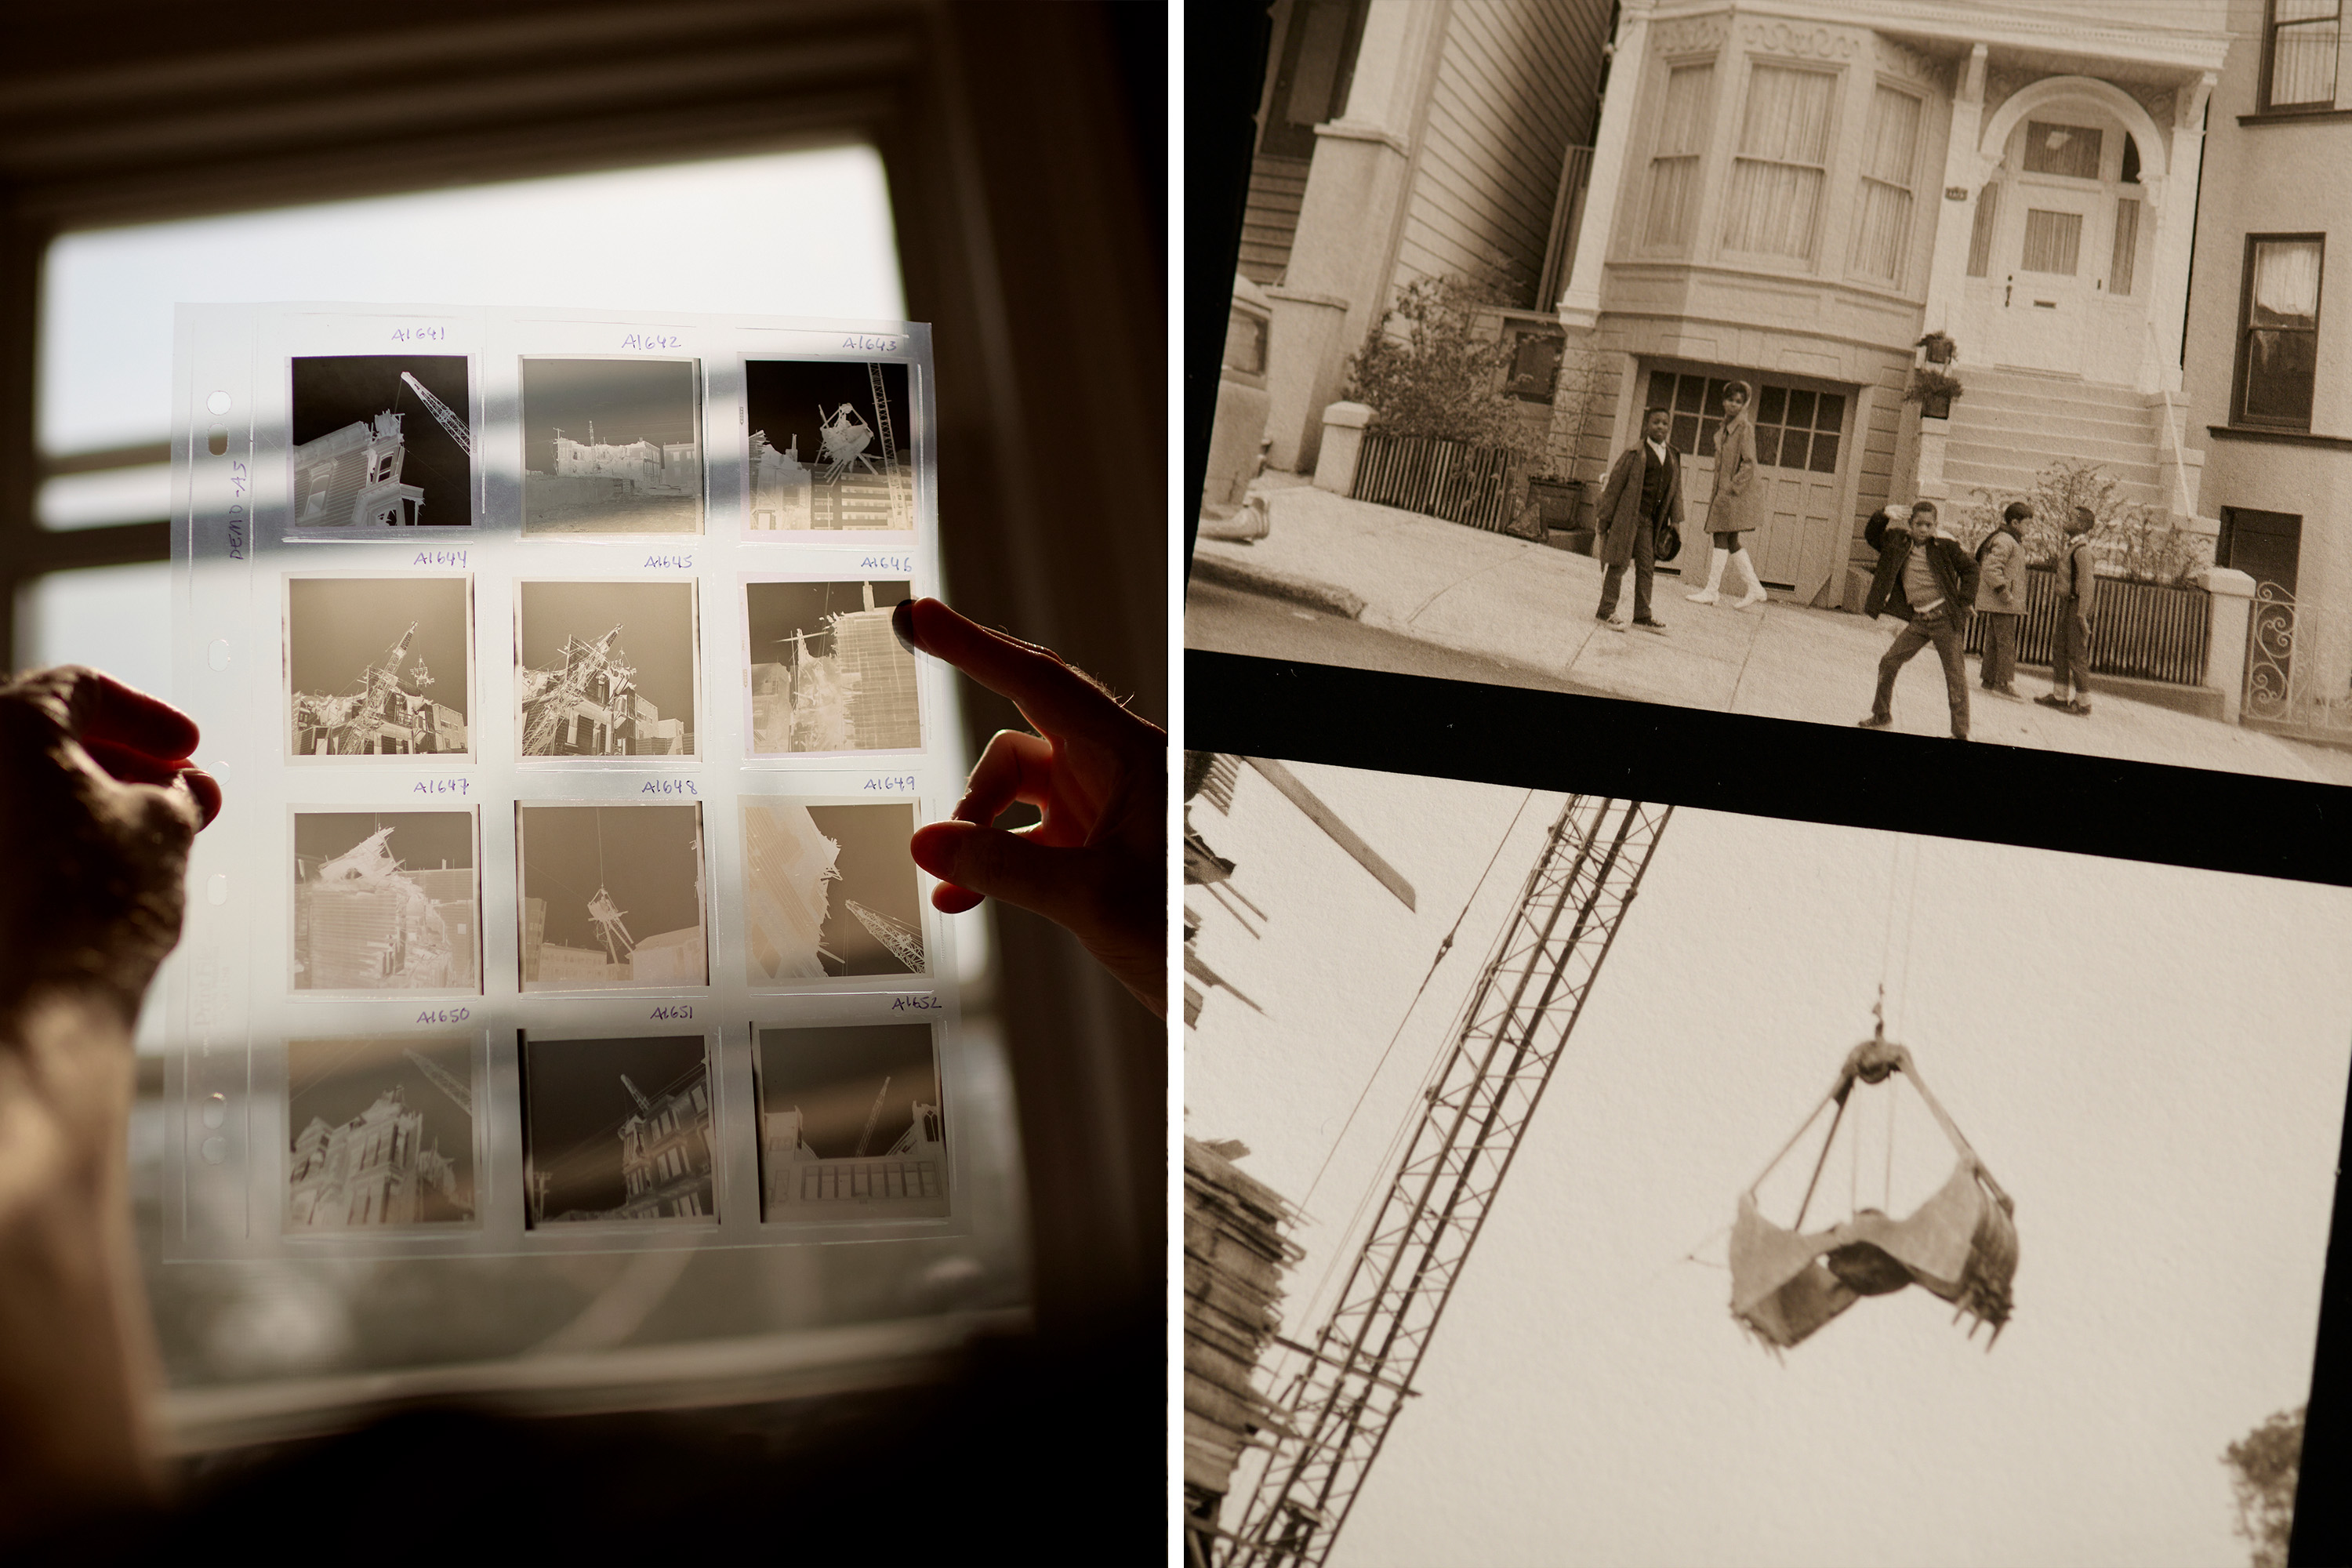 A person examines film negatives in light; a vintage photo of people by a house; a construction crane lifting debris.